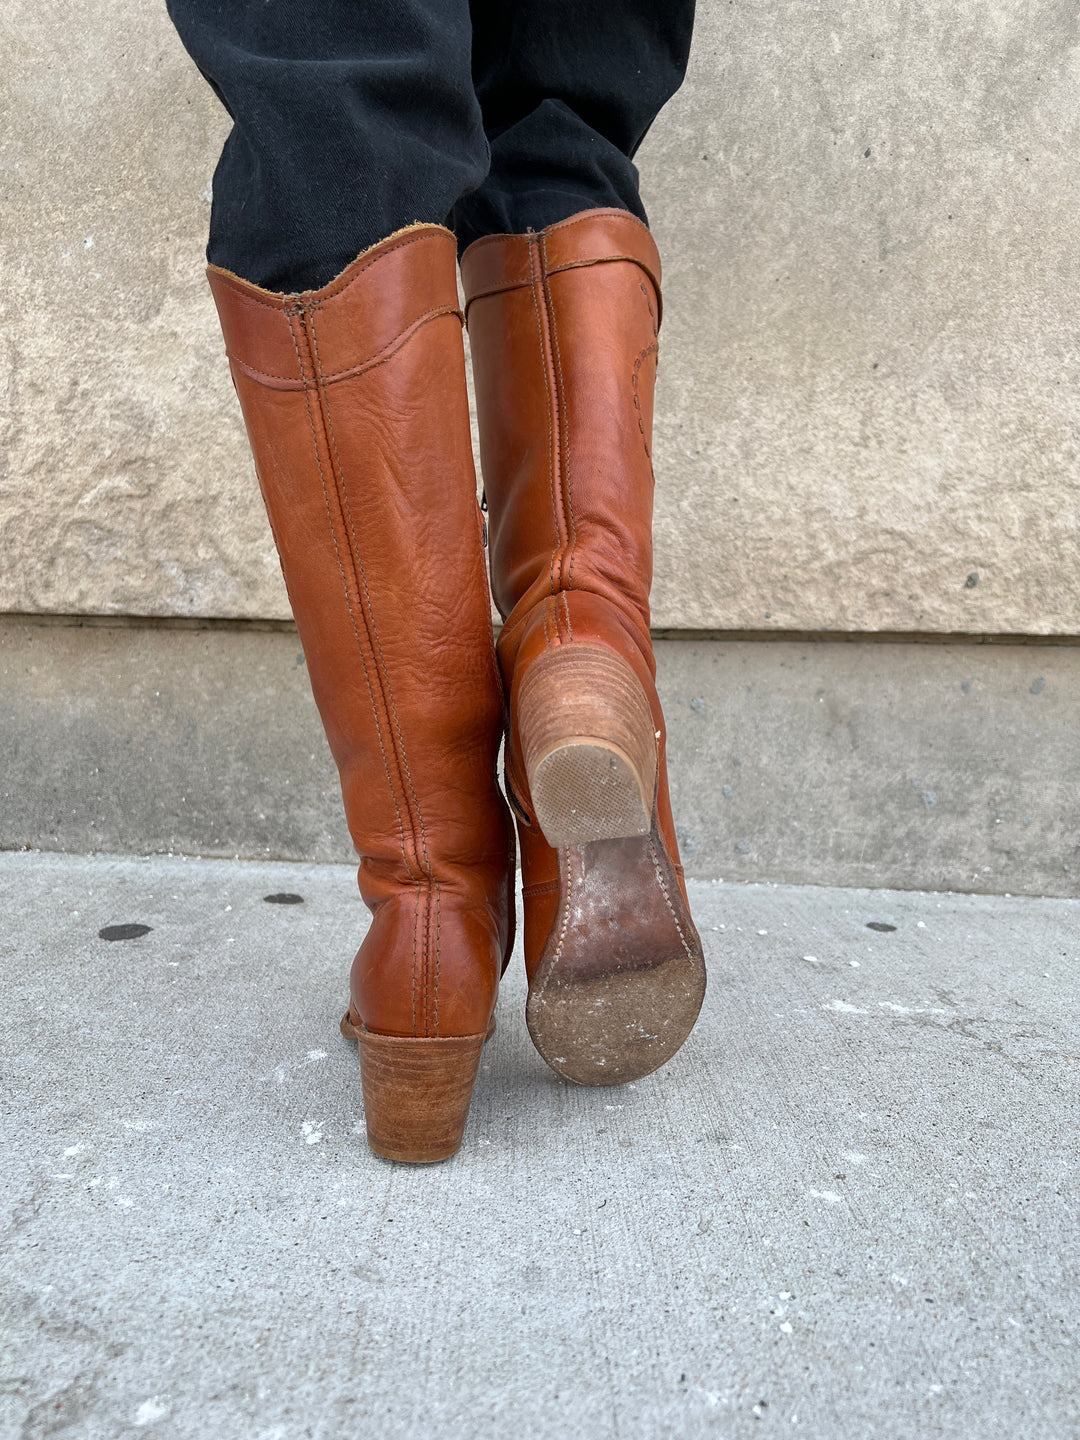 70s Brown Leather Knee-High, Heeled Western Boot